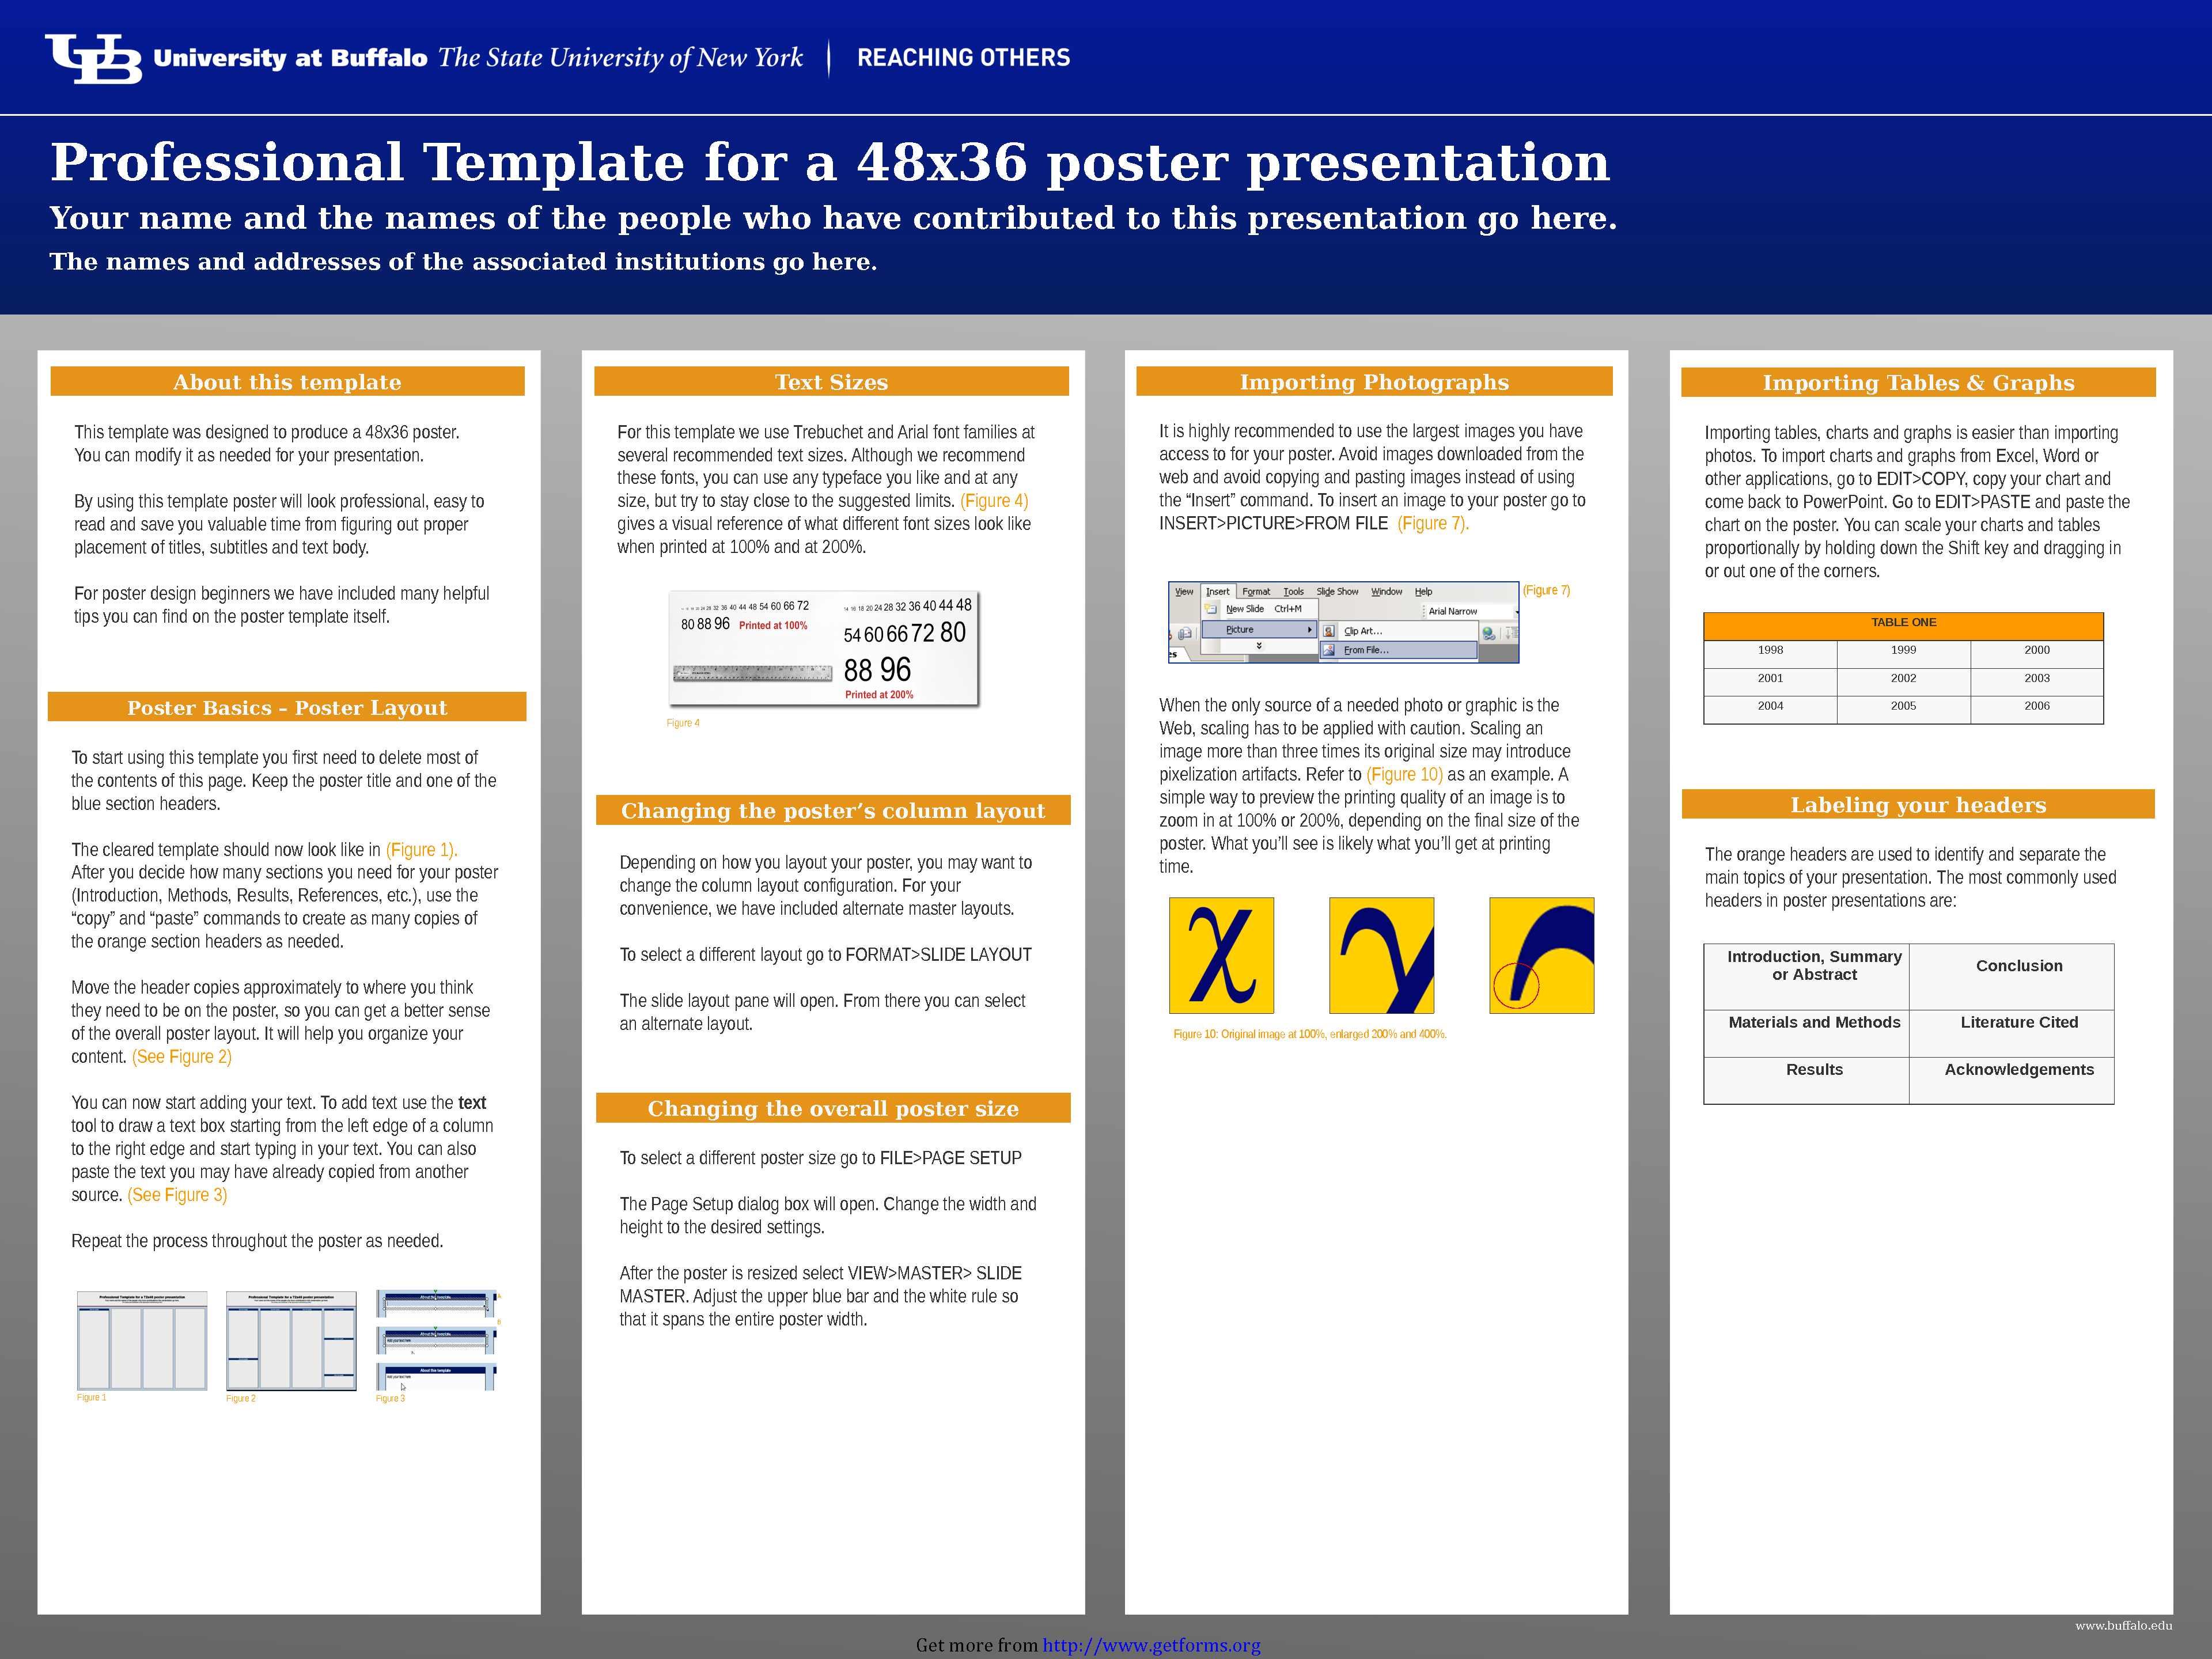 Research Poster Template 1 (48*36)